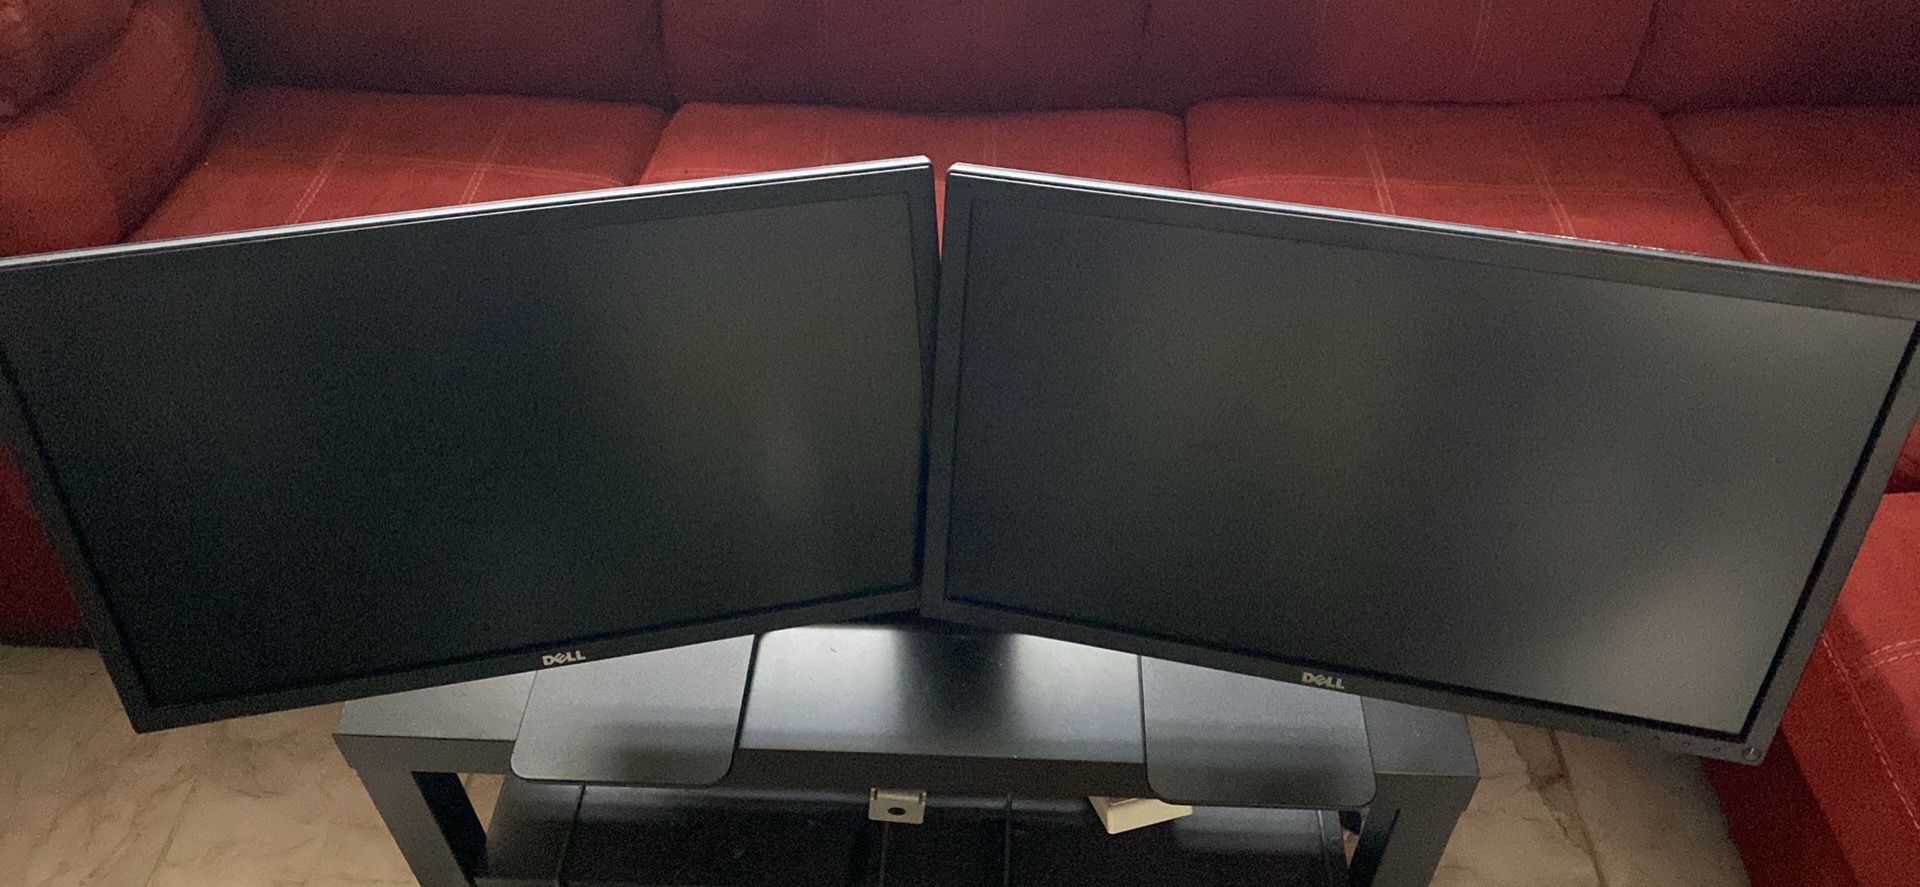 Dell 24” Inch Monitors With Dual Stand